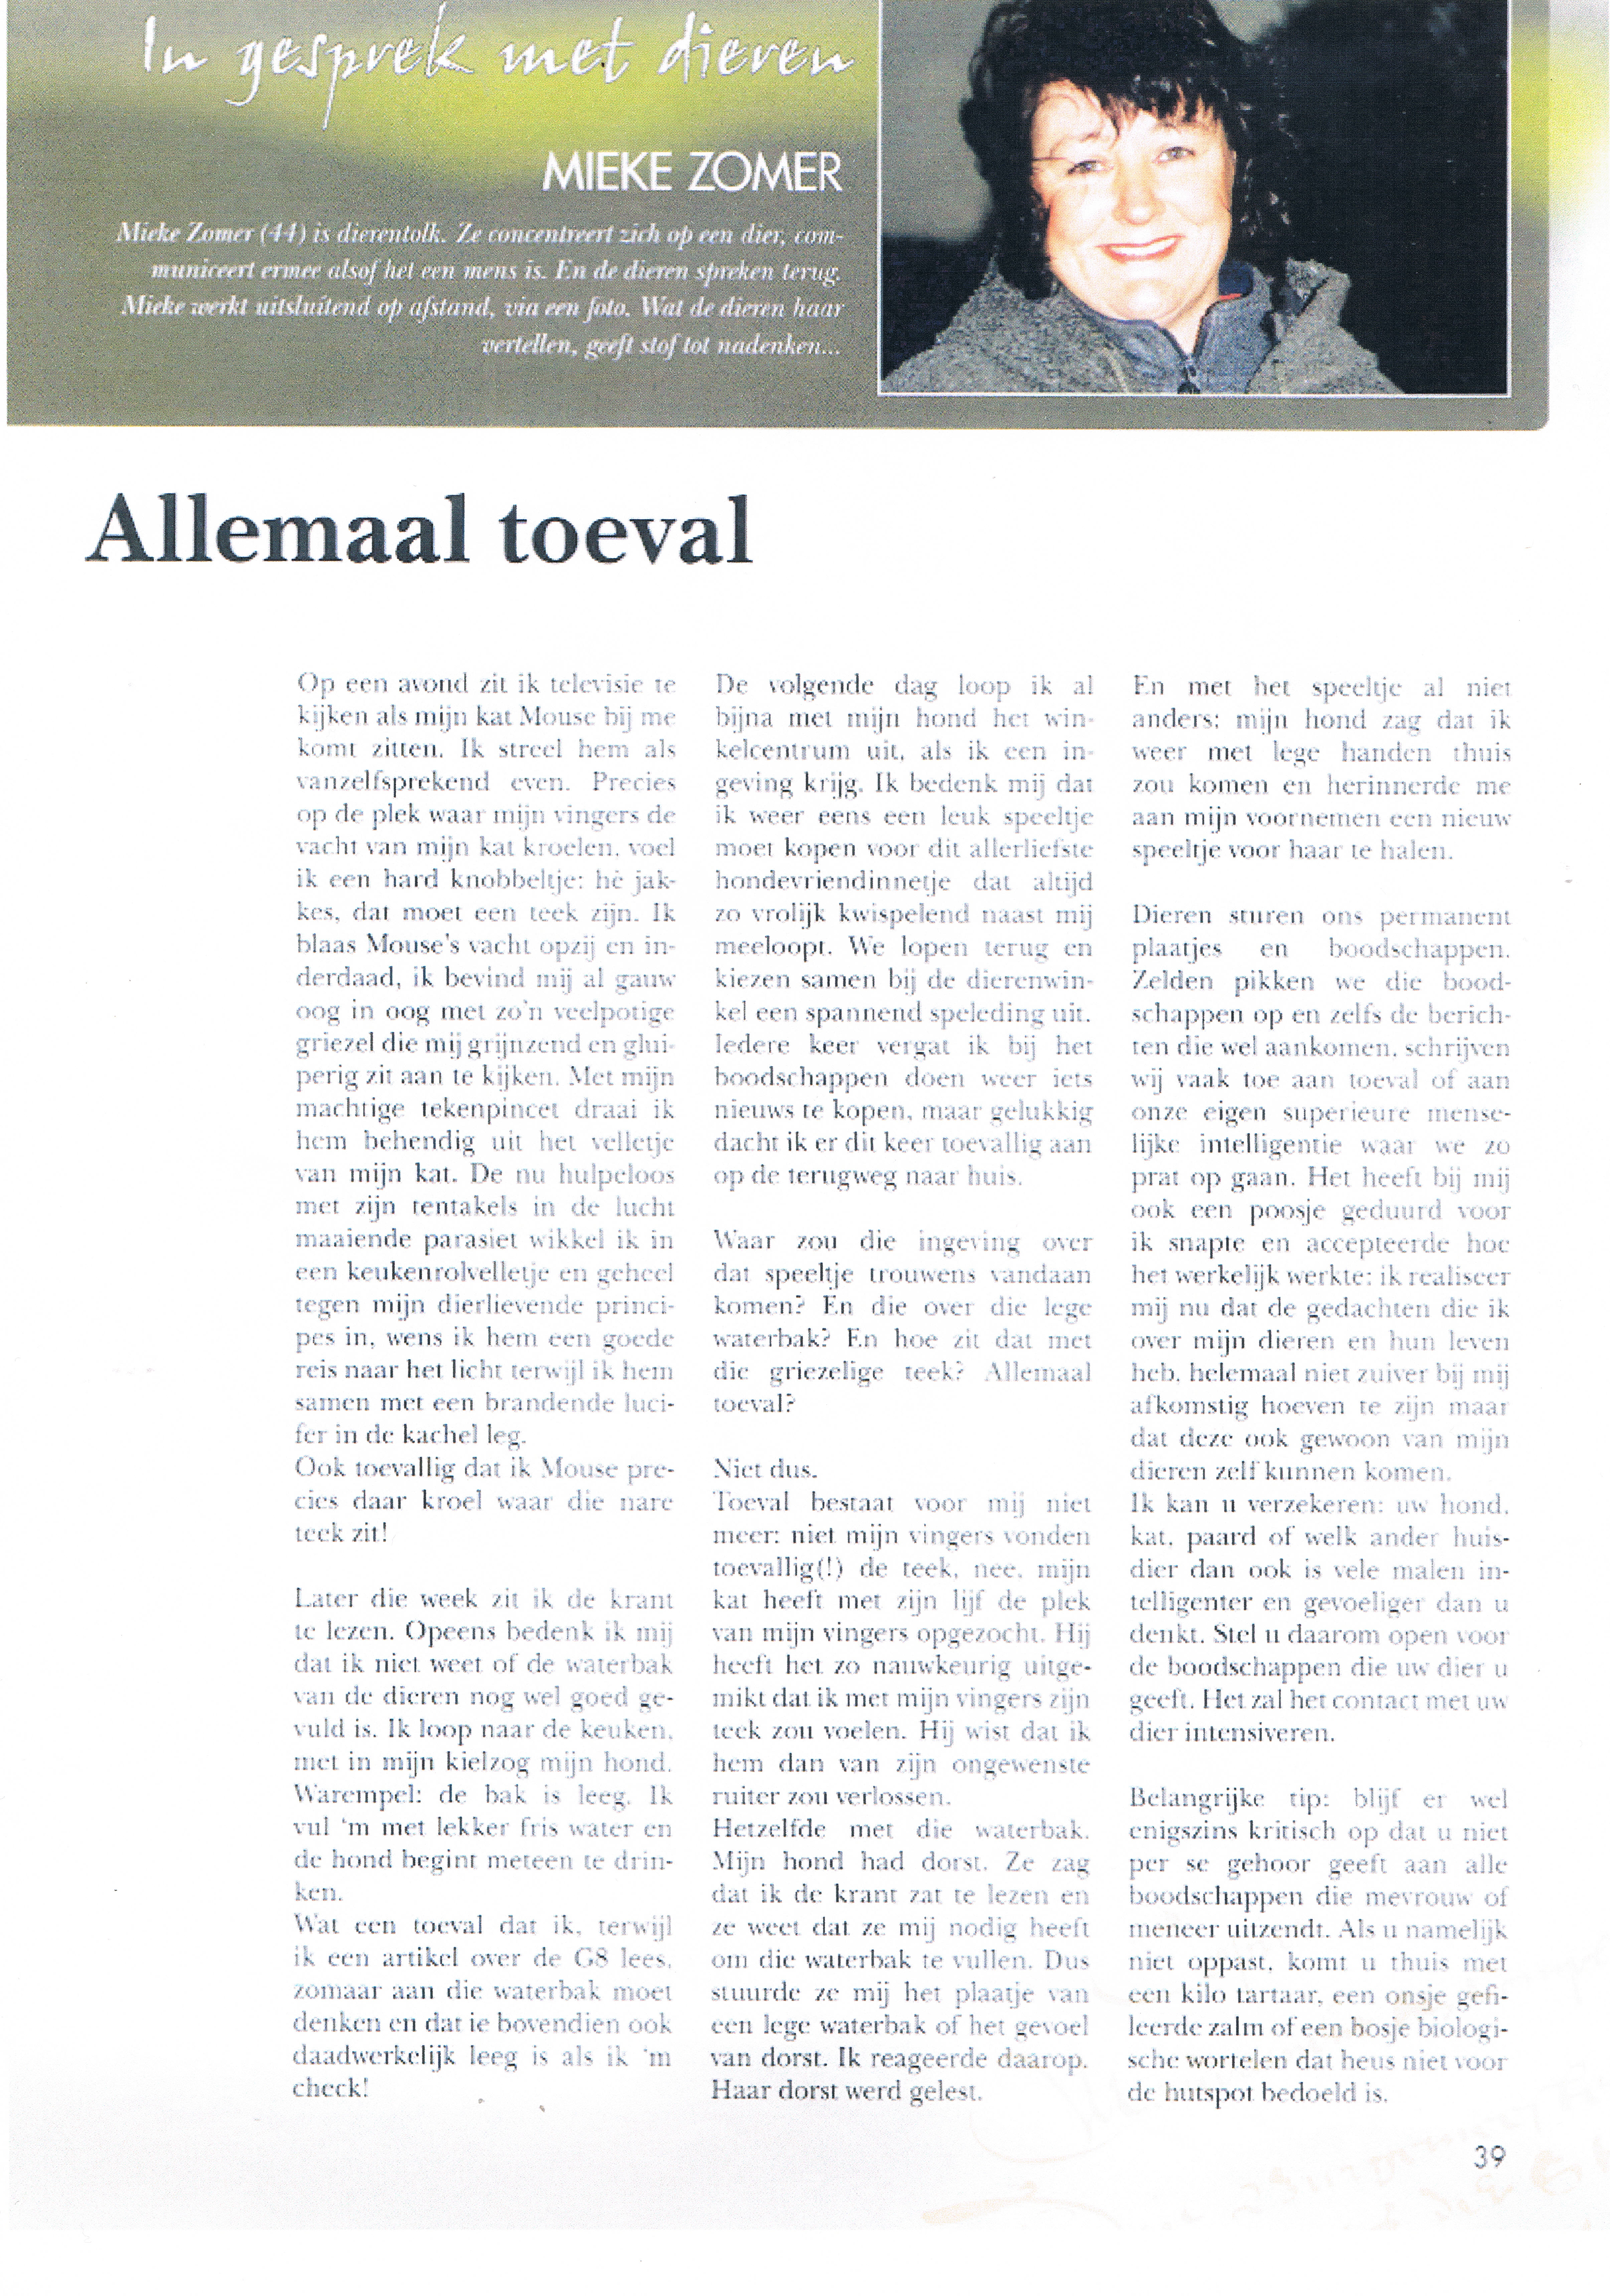 Allemaal toeval